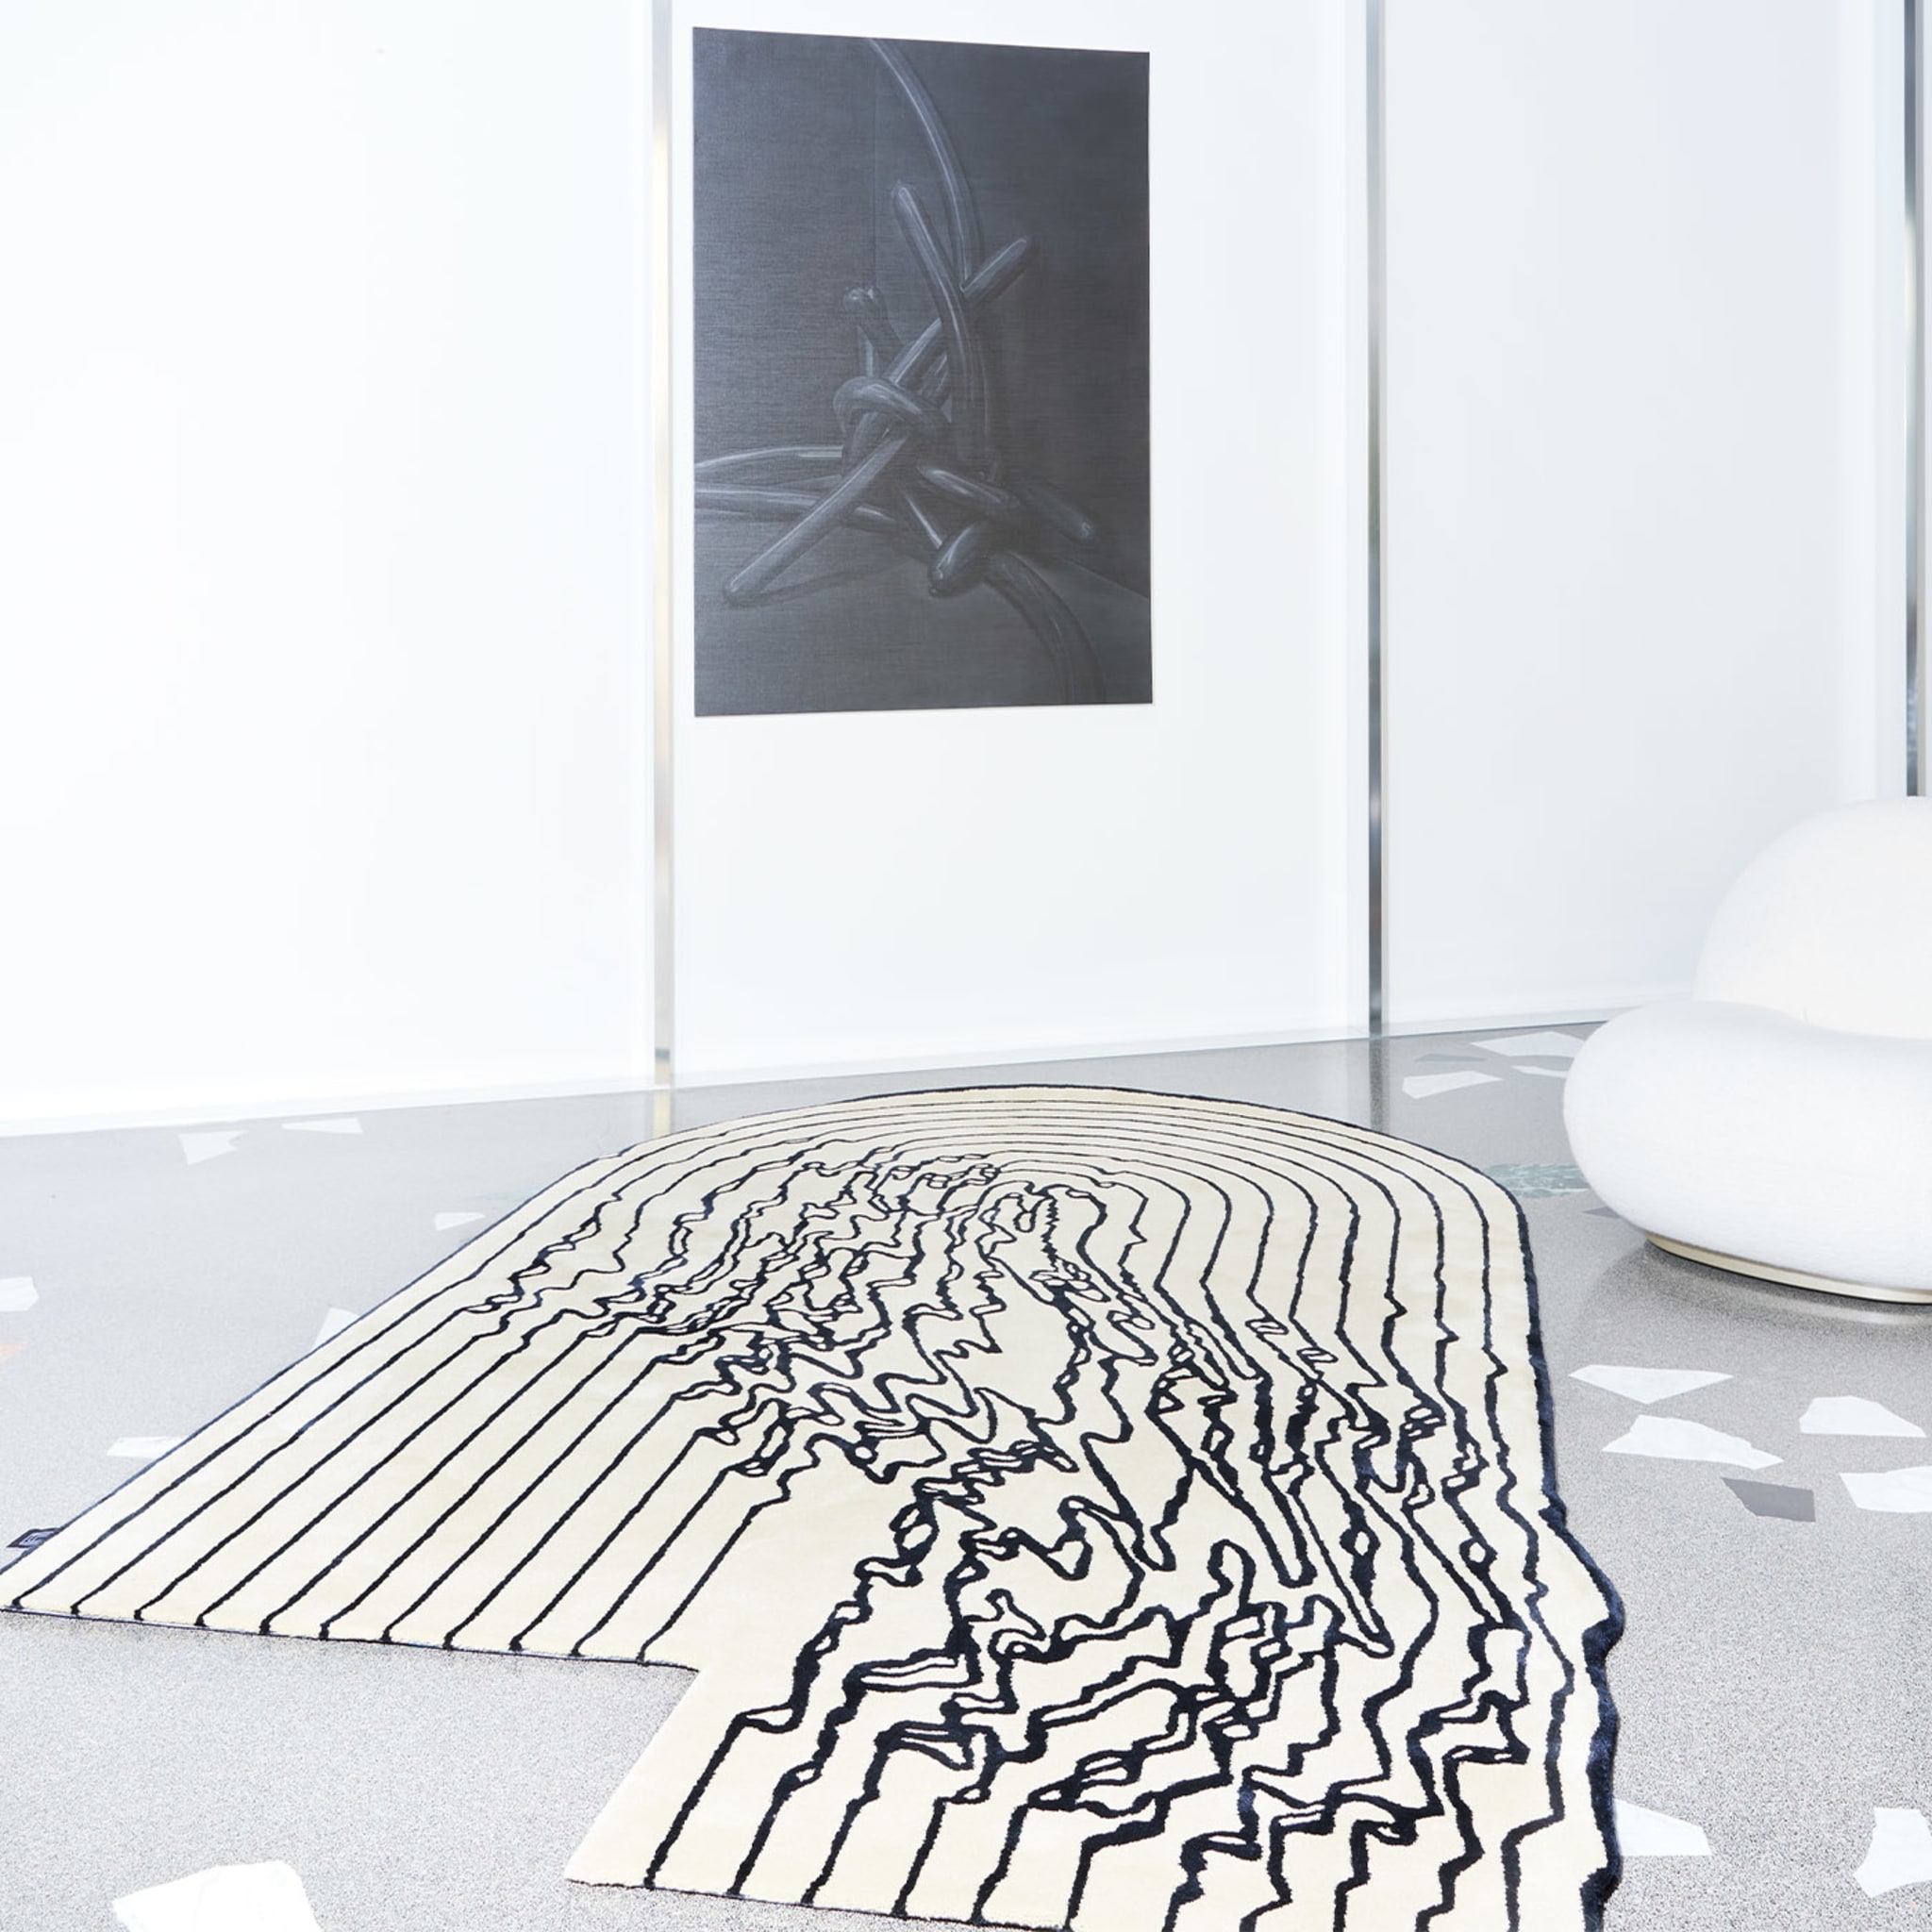 The Floor Is Lava - Lava Line Black-and-White Rug by PLACéE - Alternative view 3